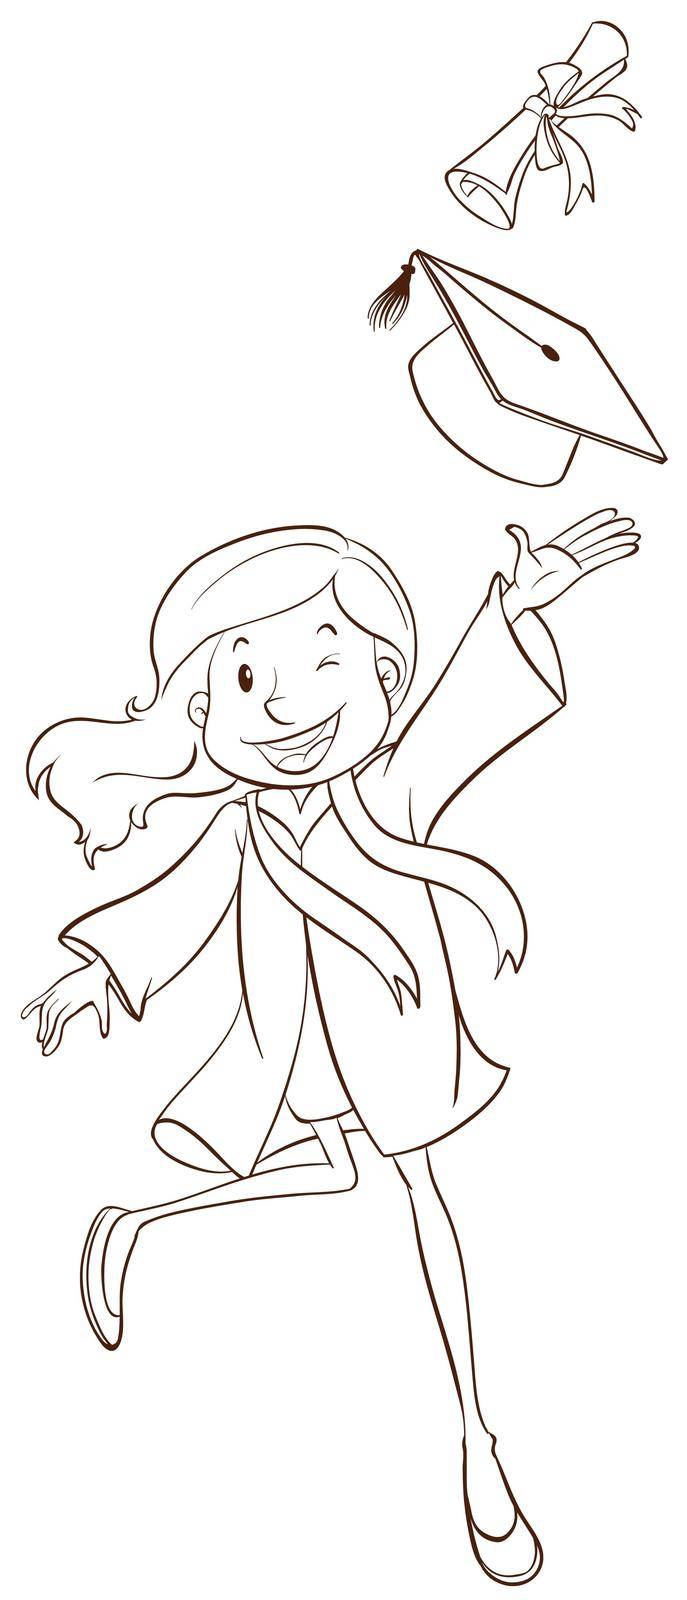 Illustration of a simple sketch of a girl graduating on a white background